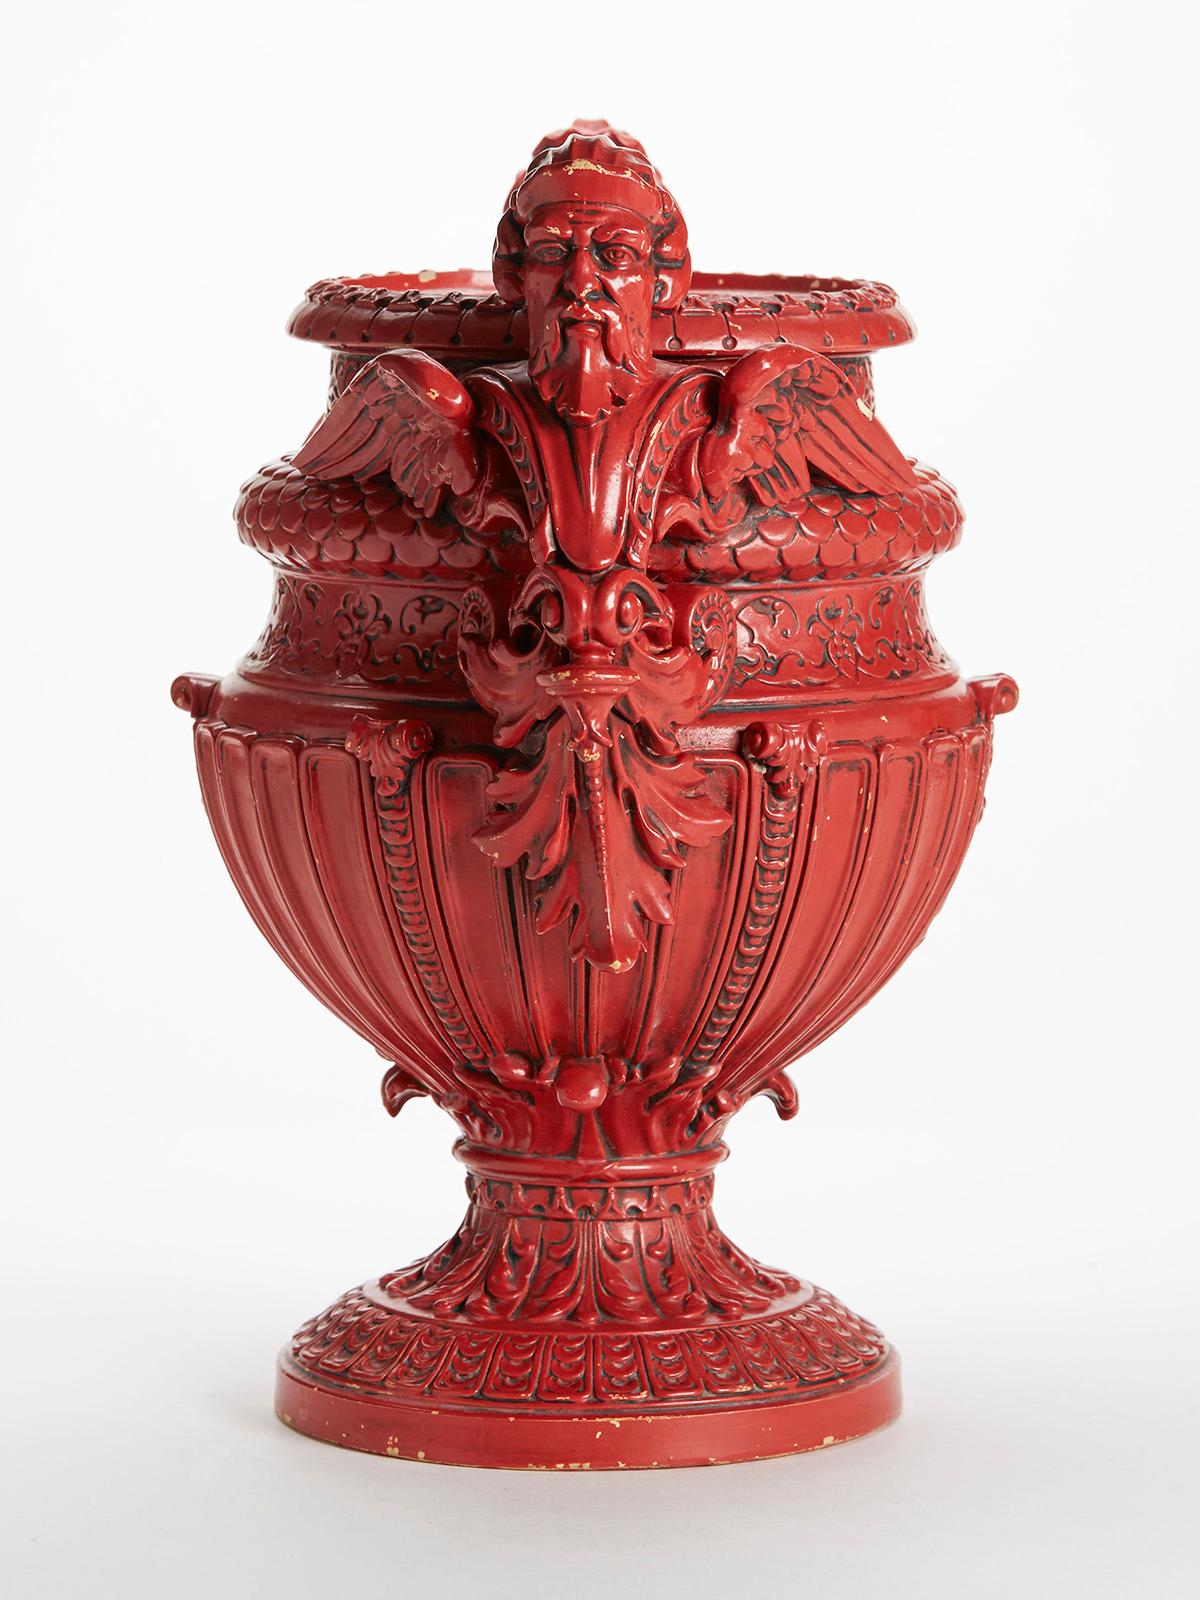 Glazed Antique Red Majolica Earthenware Twin Handled Vase, 19th Century